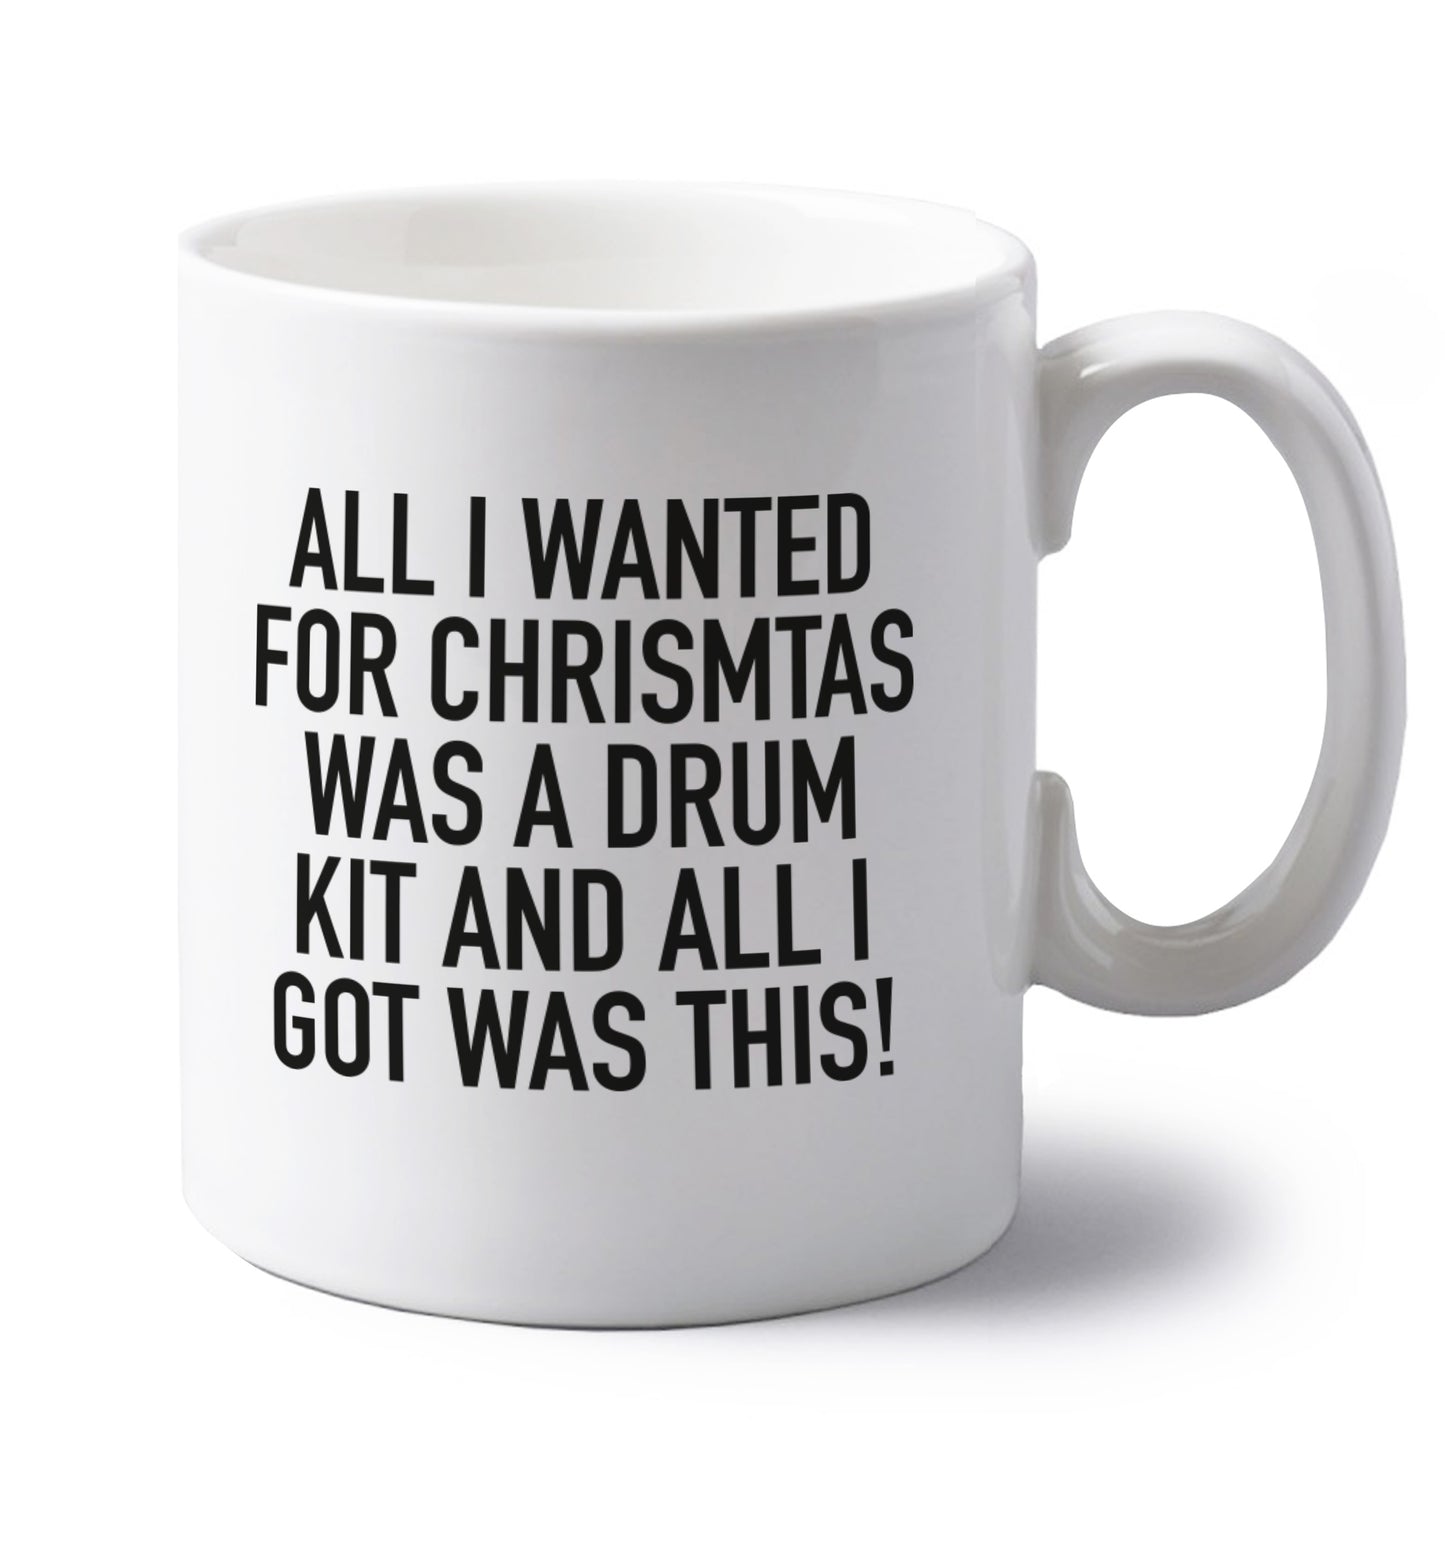 All I wanted for Christmas was a drum kit and all I got was this! left handed white ceramic mug 